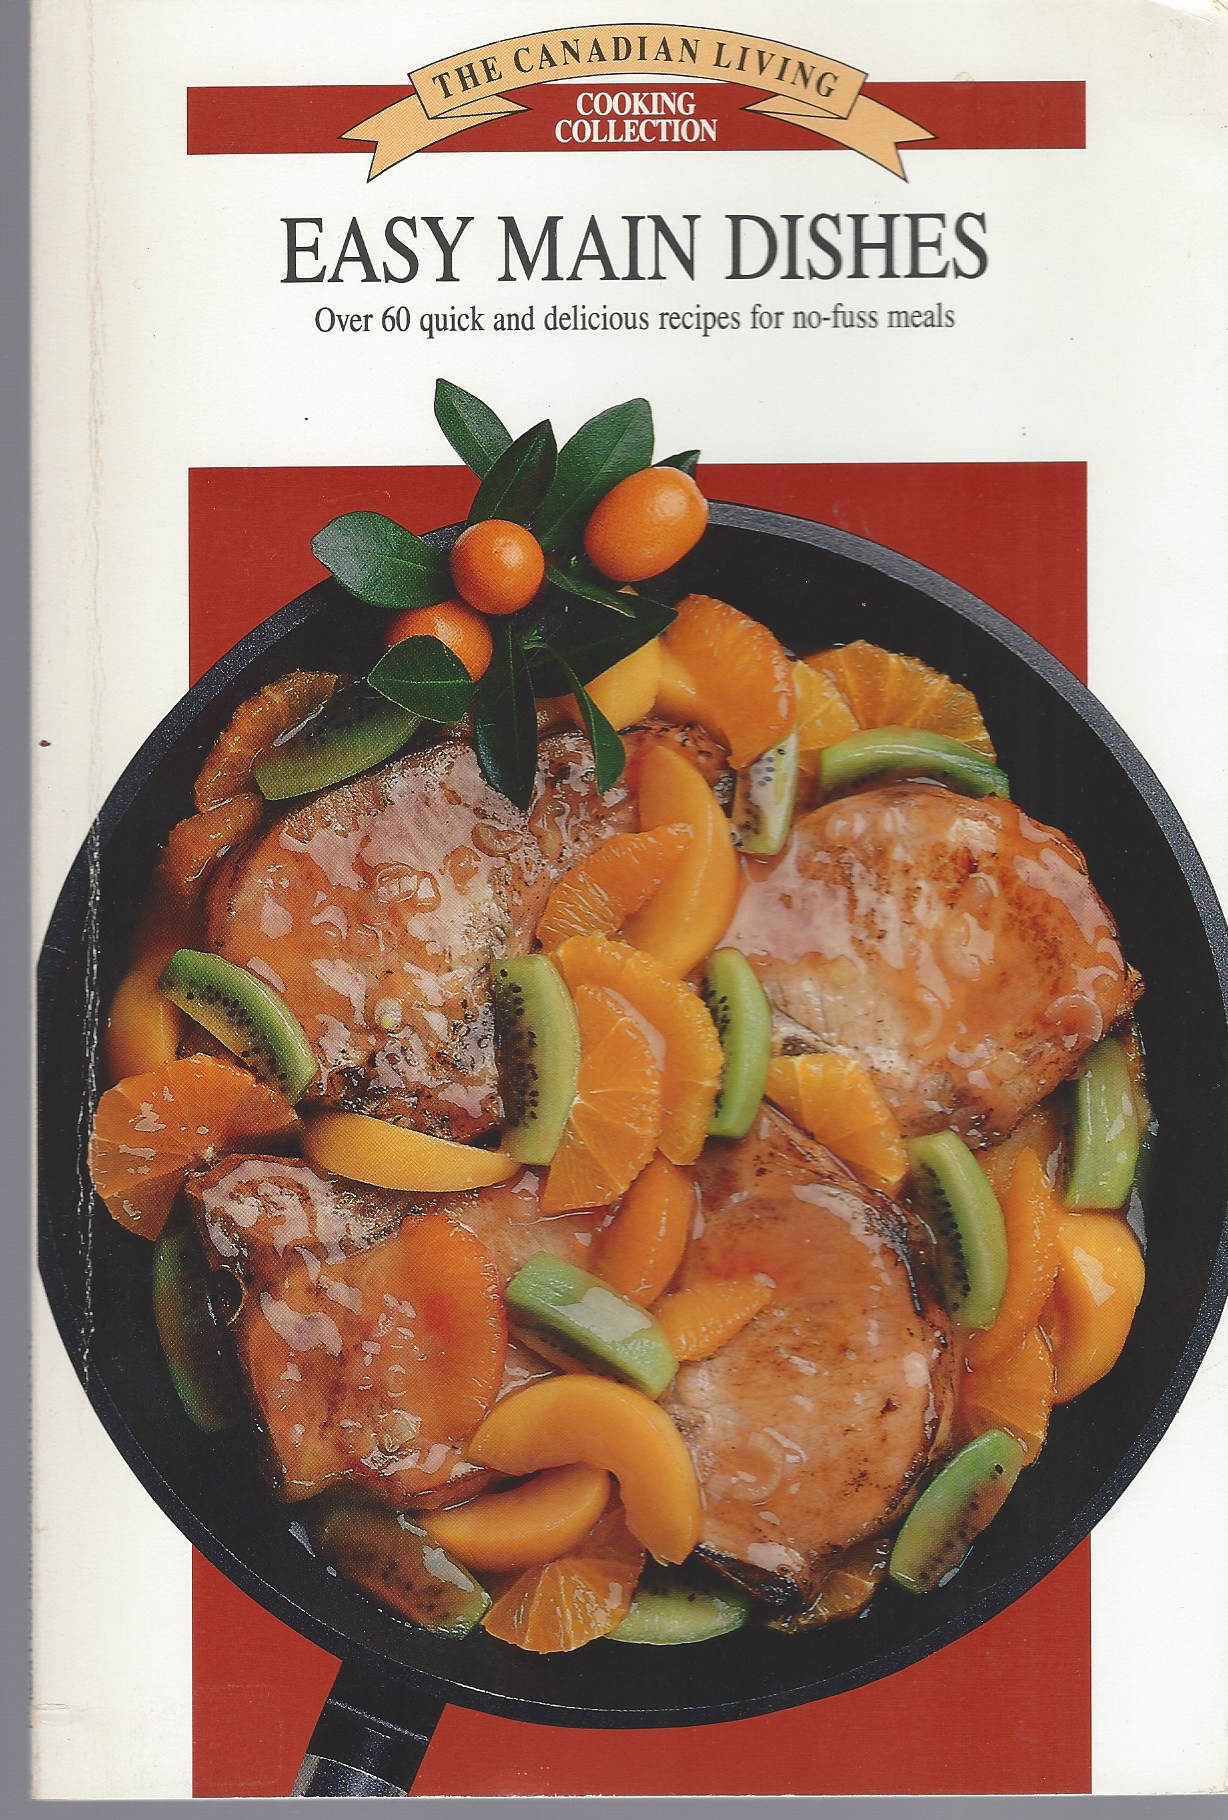 BAIRD, ELIZABETH - Canadian Living Cooking Collection, Easy Main Dishes